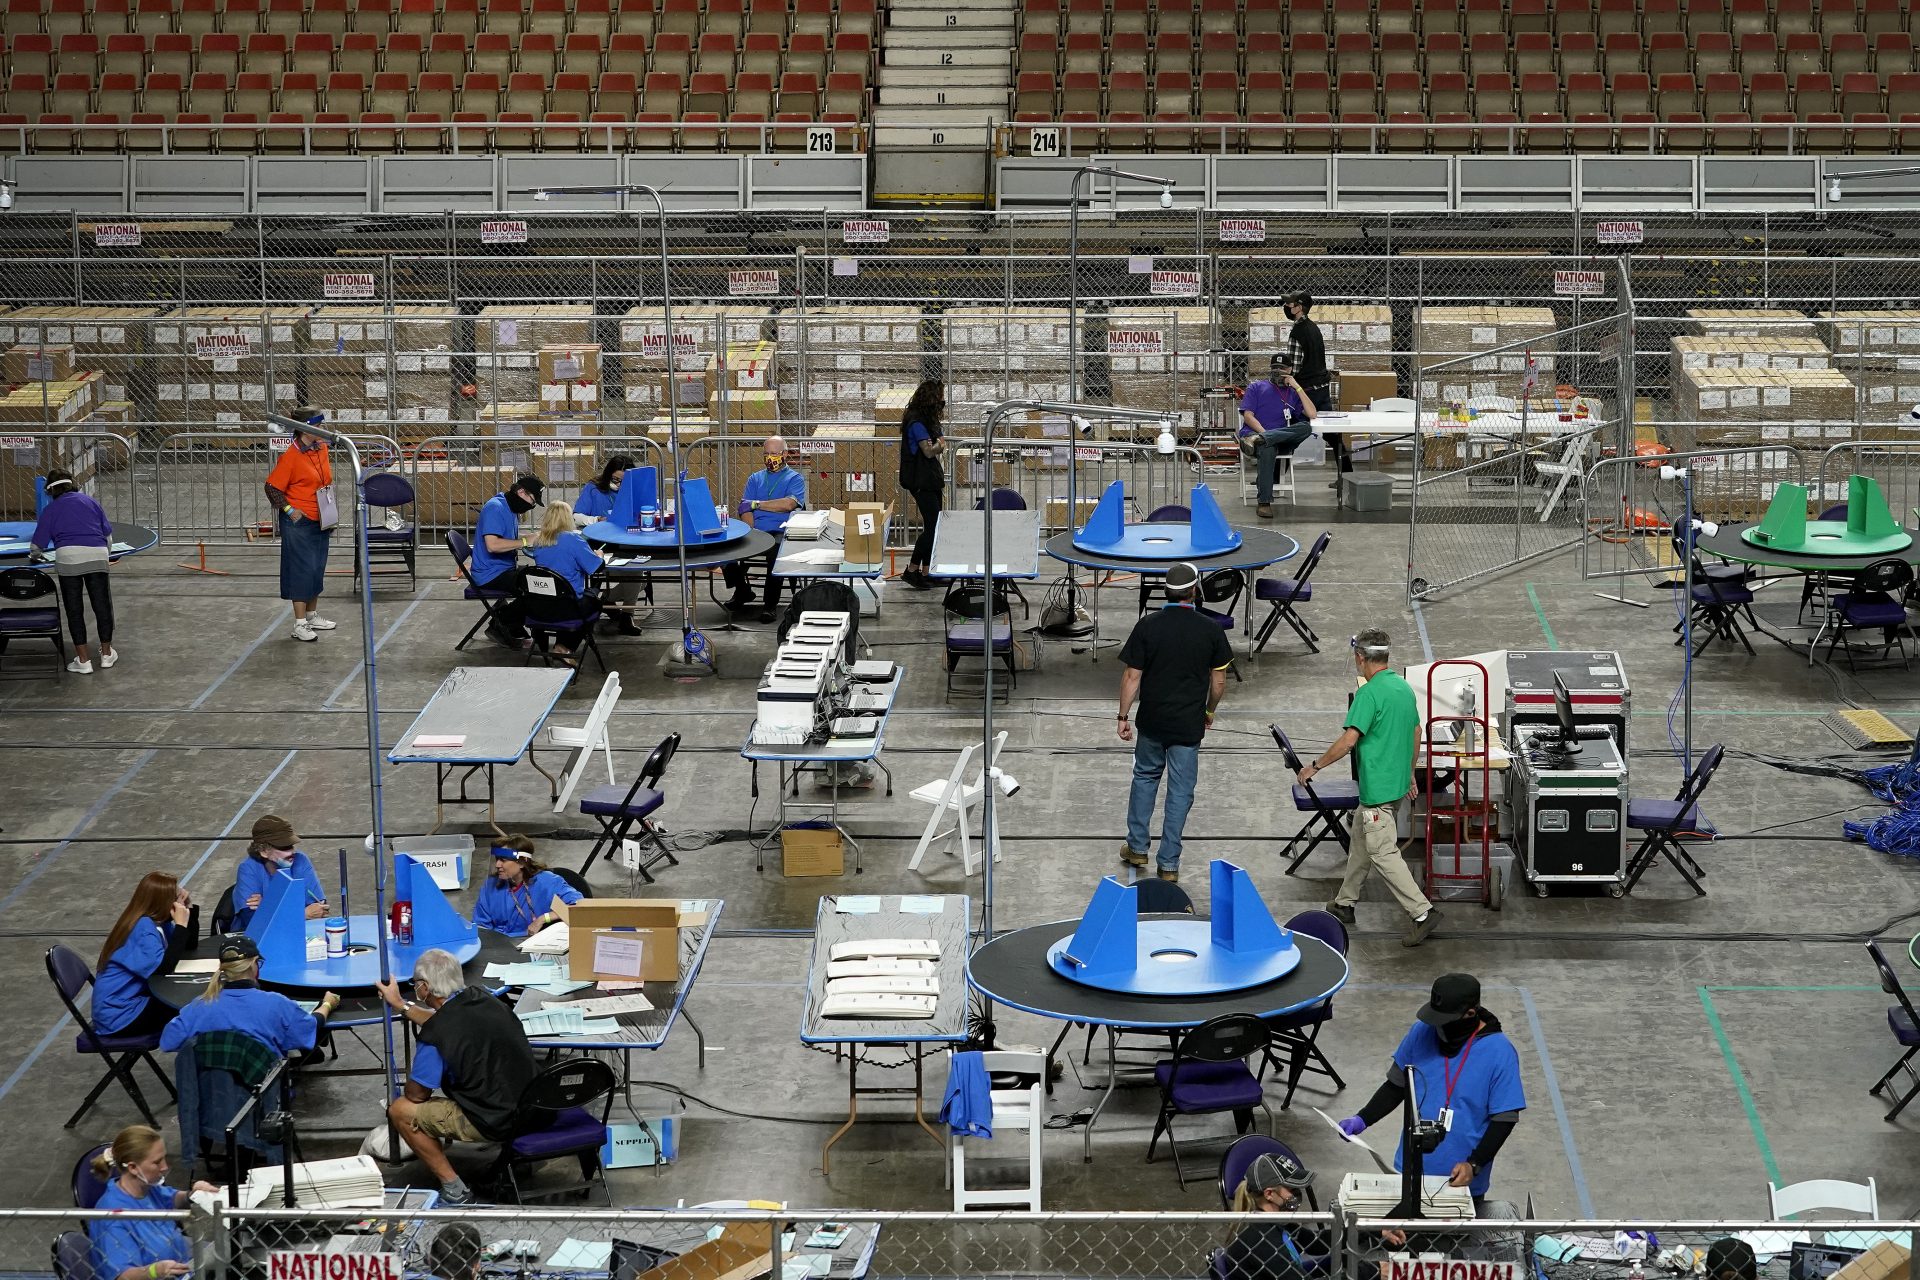 Maricopa County ballots cast in the 2020 general election are examined and recounted by contractors working for Florida-based company, Cyber Ninjas, Thursday, May 6, 2021 at Veterans Memorial Coliseum in Phoenix.